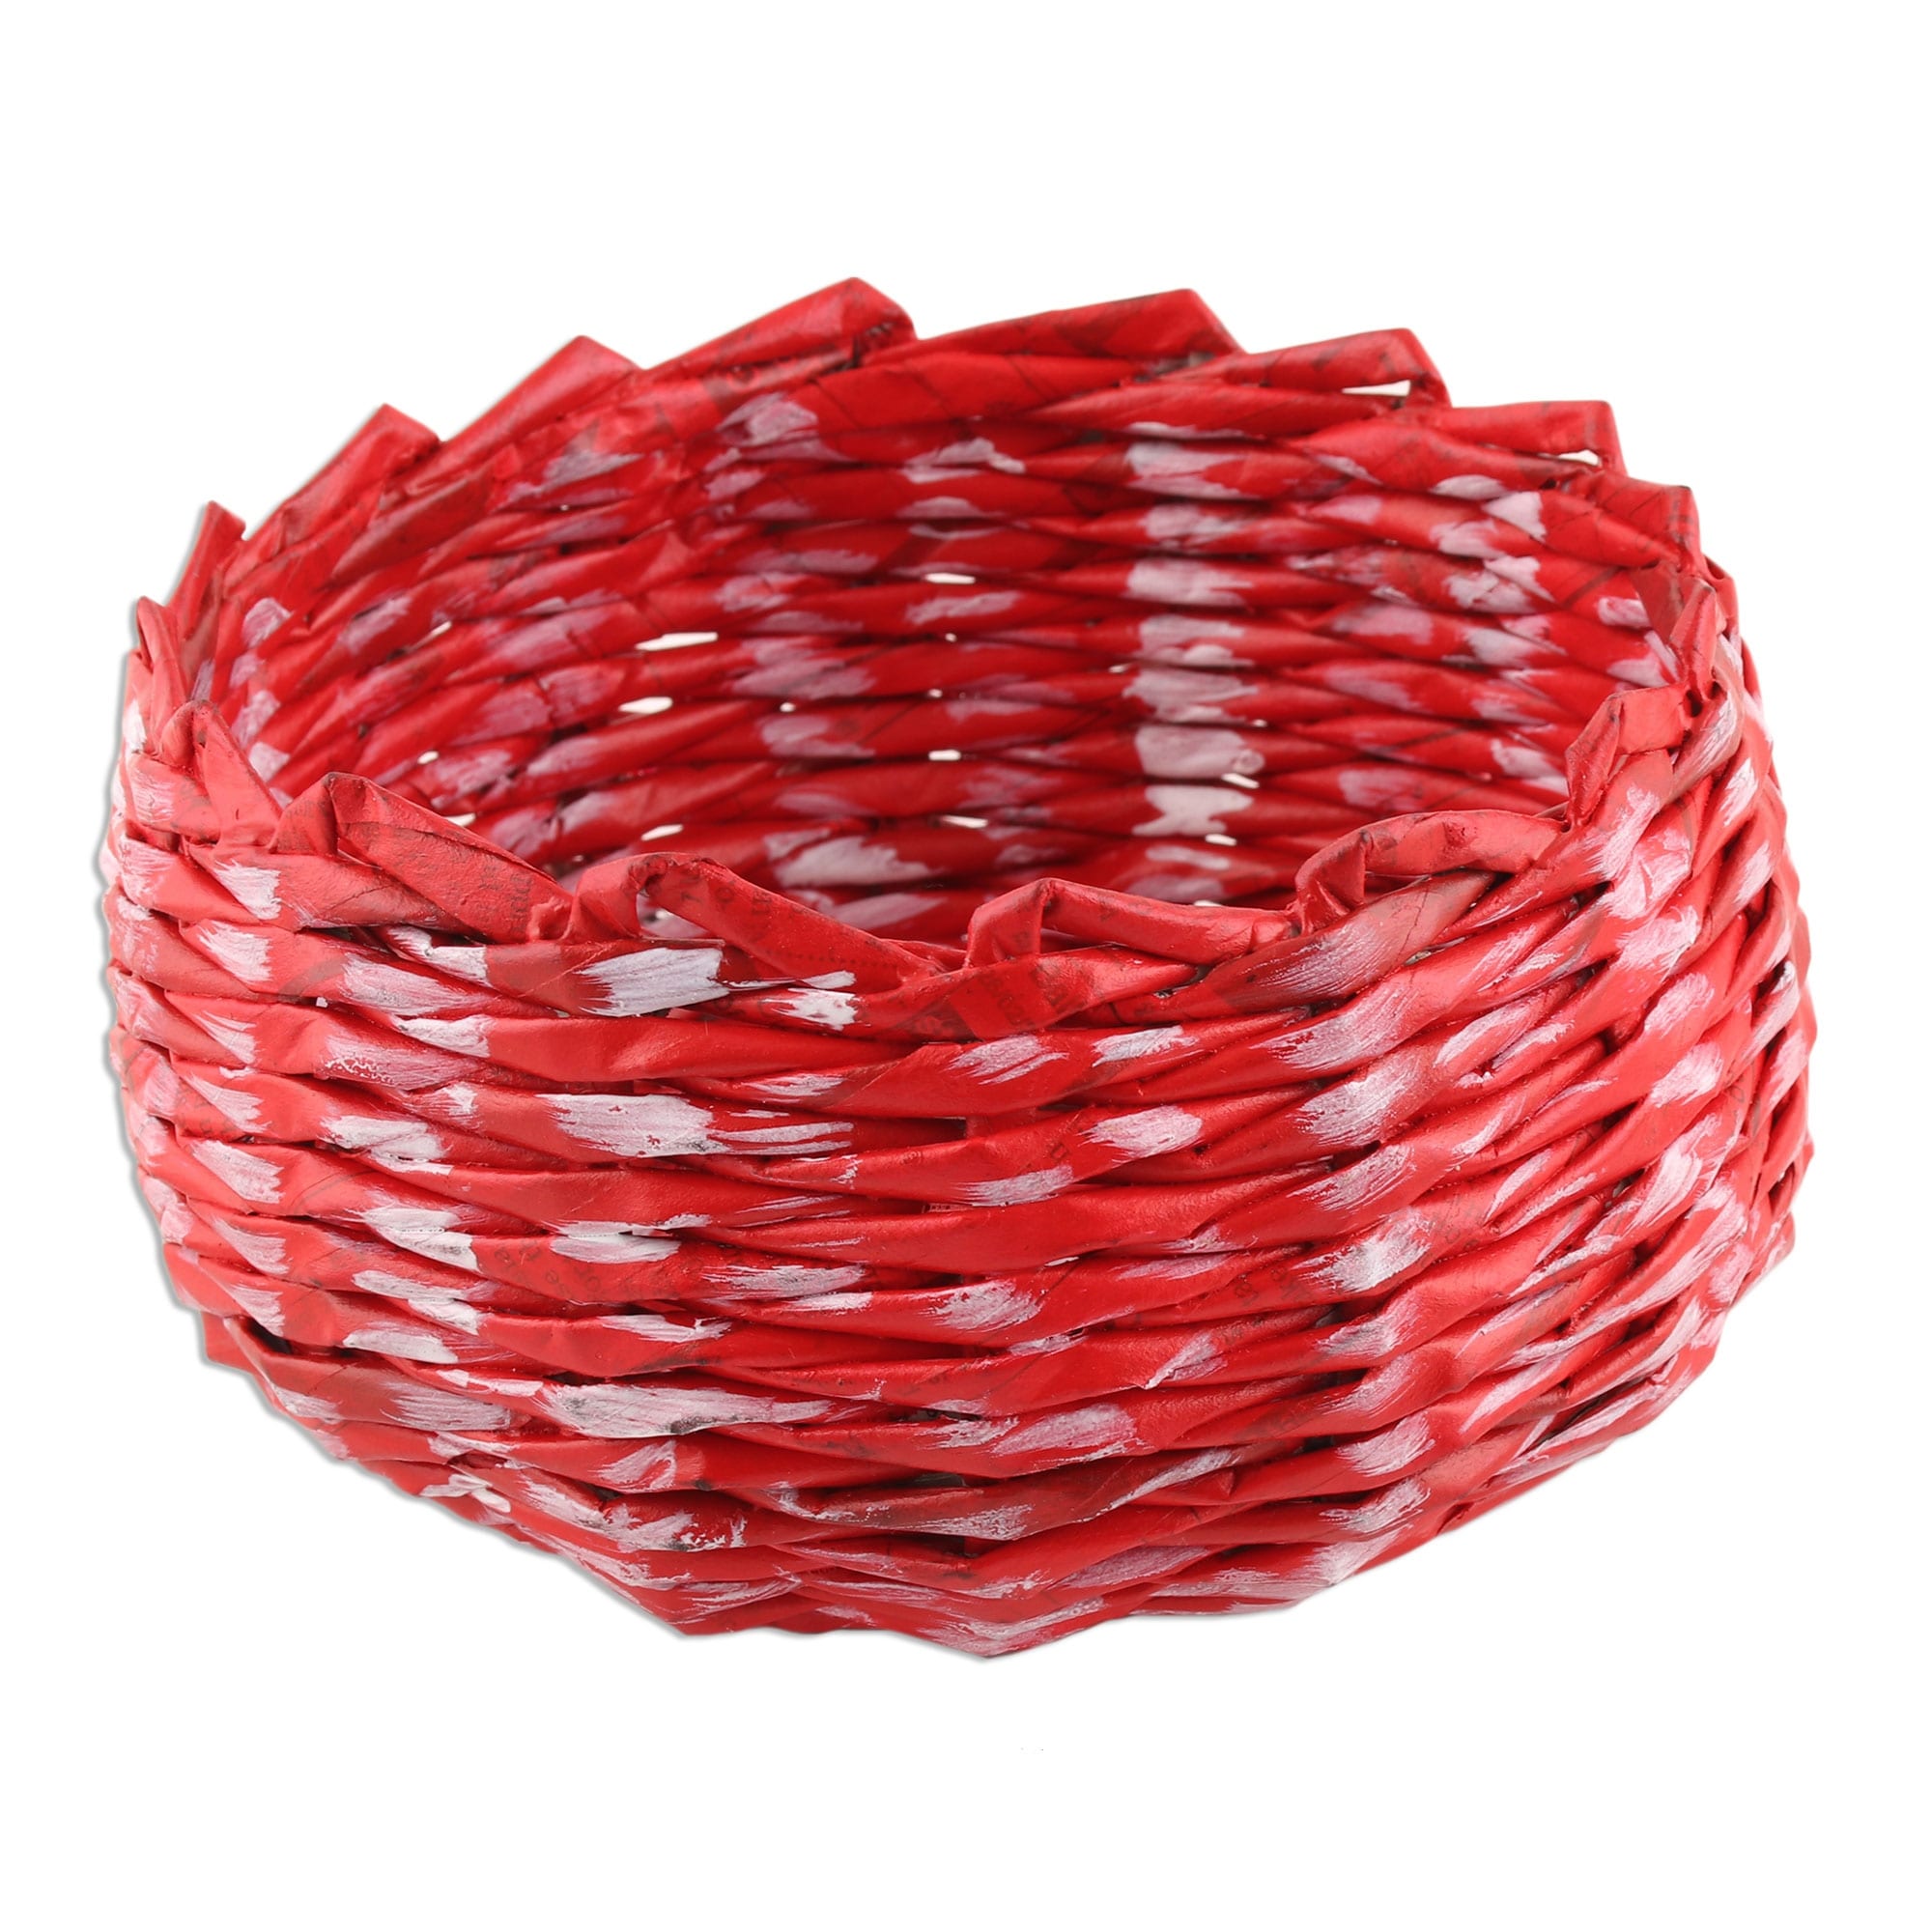 https://ak1.ostkcdn.com/images/products/is/images/direct/64404f5379c2670d1fb5ccd4b4337a06cda47e45/NOVICA-Handmade-Red-And-White-Recycled-Paper-Basket.jpg